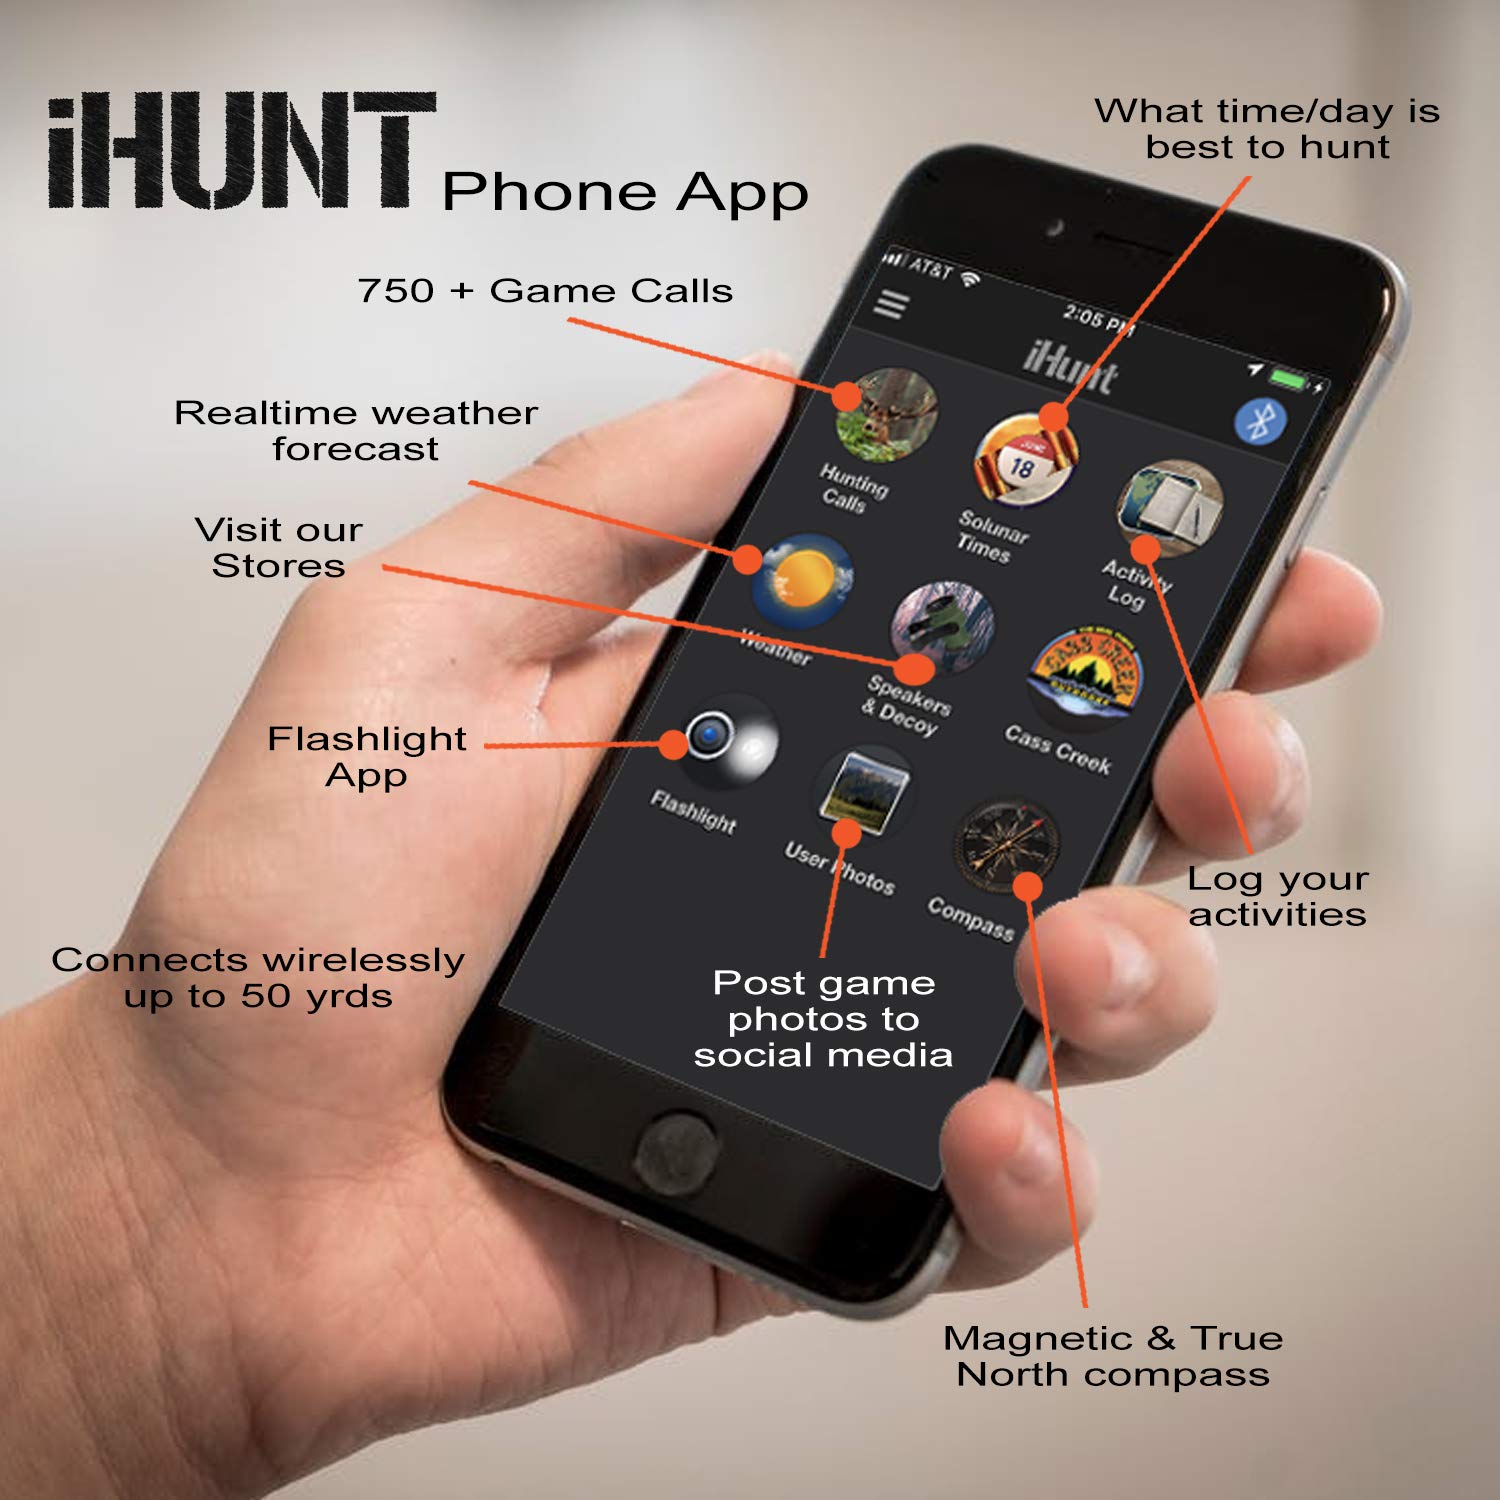 iHunt XSB Electronic Game Call & Bluetooth Speaker Combo, EDIHXSB, FREE App with 750 Game Calls, Compact Rugged Design